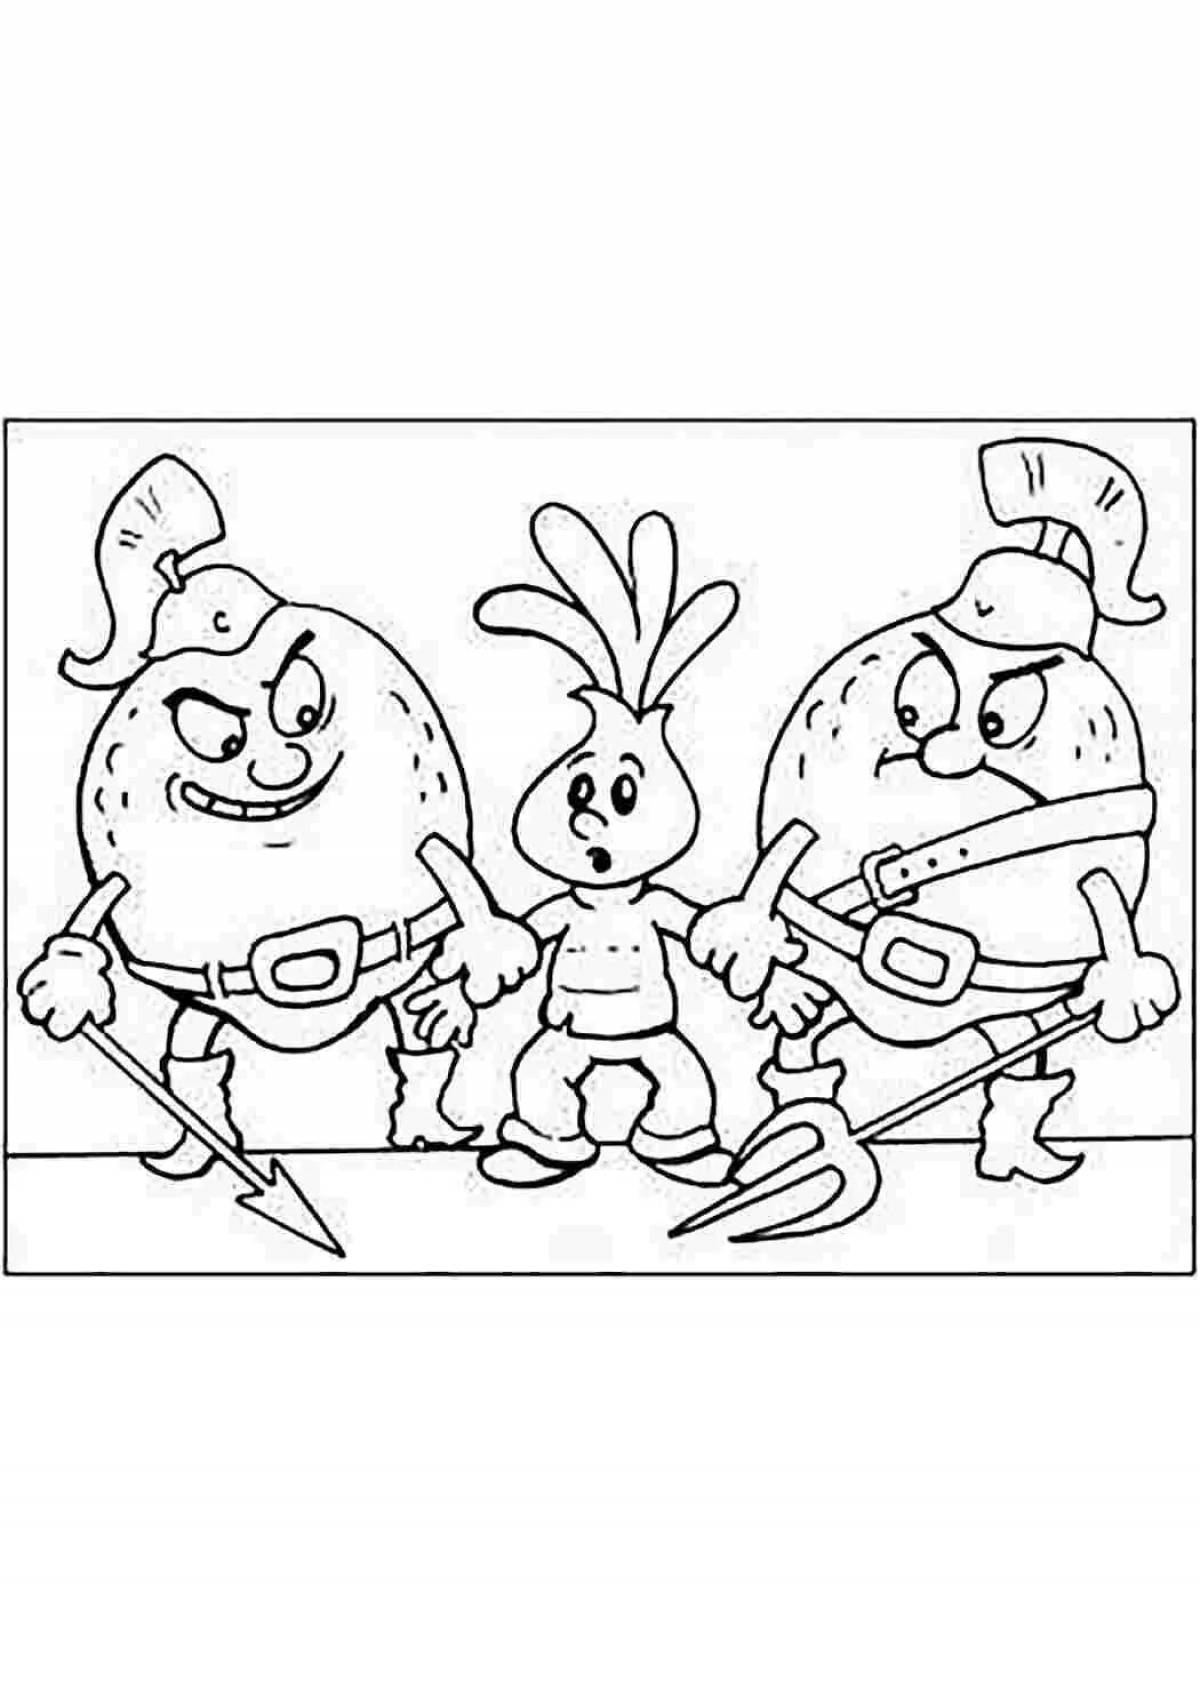 Glowing Chippolino coloring page